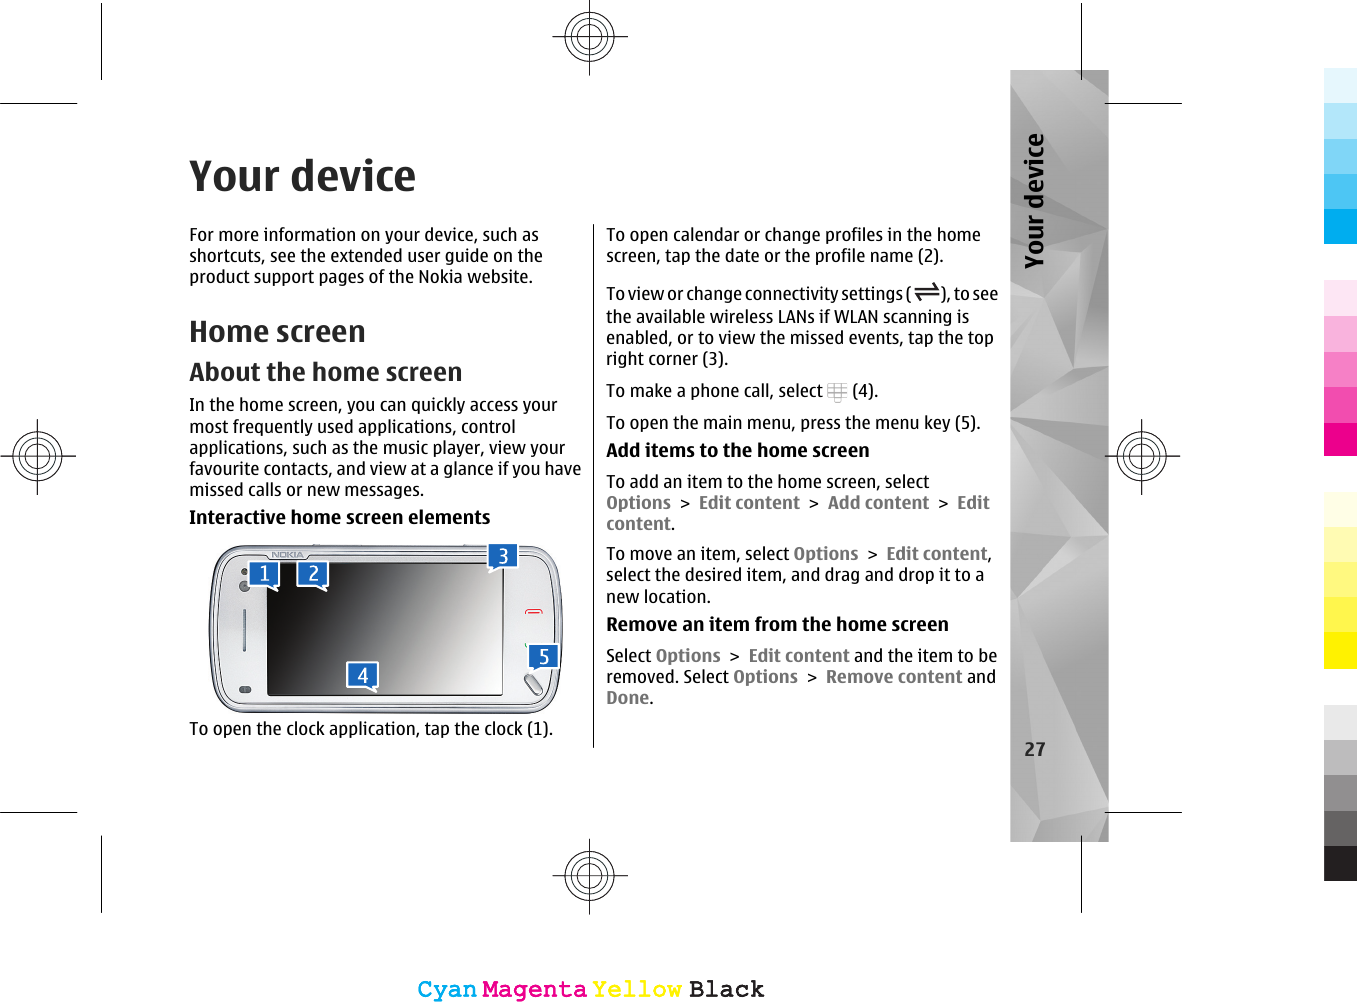 Your deviceFor more information on your device, such asshortcuts, see the extended user guide on theproduct support pages of the Nokia website.Home screenAbout the home screenIn the home screen, you can quickly access yourmost frequently used applications, controlapplications, such as the music player, view yourfavourite contacts, and view at a glance if you havemissed calls or new messages.Interactive home screen elementsTo open the clock application, tap the clock (1).To open calendar or change profiles in the homescreen, tap the date or the profile name (2).To view or change connectivity settings ( ), to seethe available wireless LANs if WLAN scanning isenabled, or to view the missed events, tap the topright corner (3).To make a phone call, select   (4).To open the main menu, press the menu key (5).Add items to the home screenTo add an item to the home screen, selectOptions &gt; Edit content &gt; Add content &gt; Editcontent.To move an item, select Options &gt; Edit content,select the desired item, and drag and drop it to anew location.Remove an item from the home screenSelect Options &gt; Edit content and the item to beremoved. Select Options &gt; Remove content andDone.27Your deviceCyanCyanMagentaMagentaYellowYellowBlackBlackCyanCyanMagentaMagentaYellowYellowBlackBlack